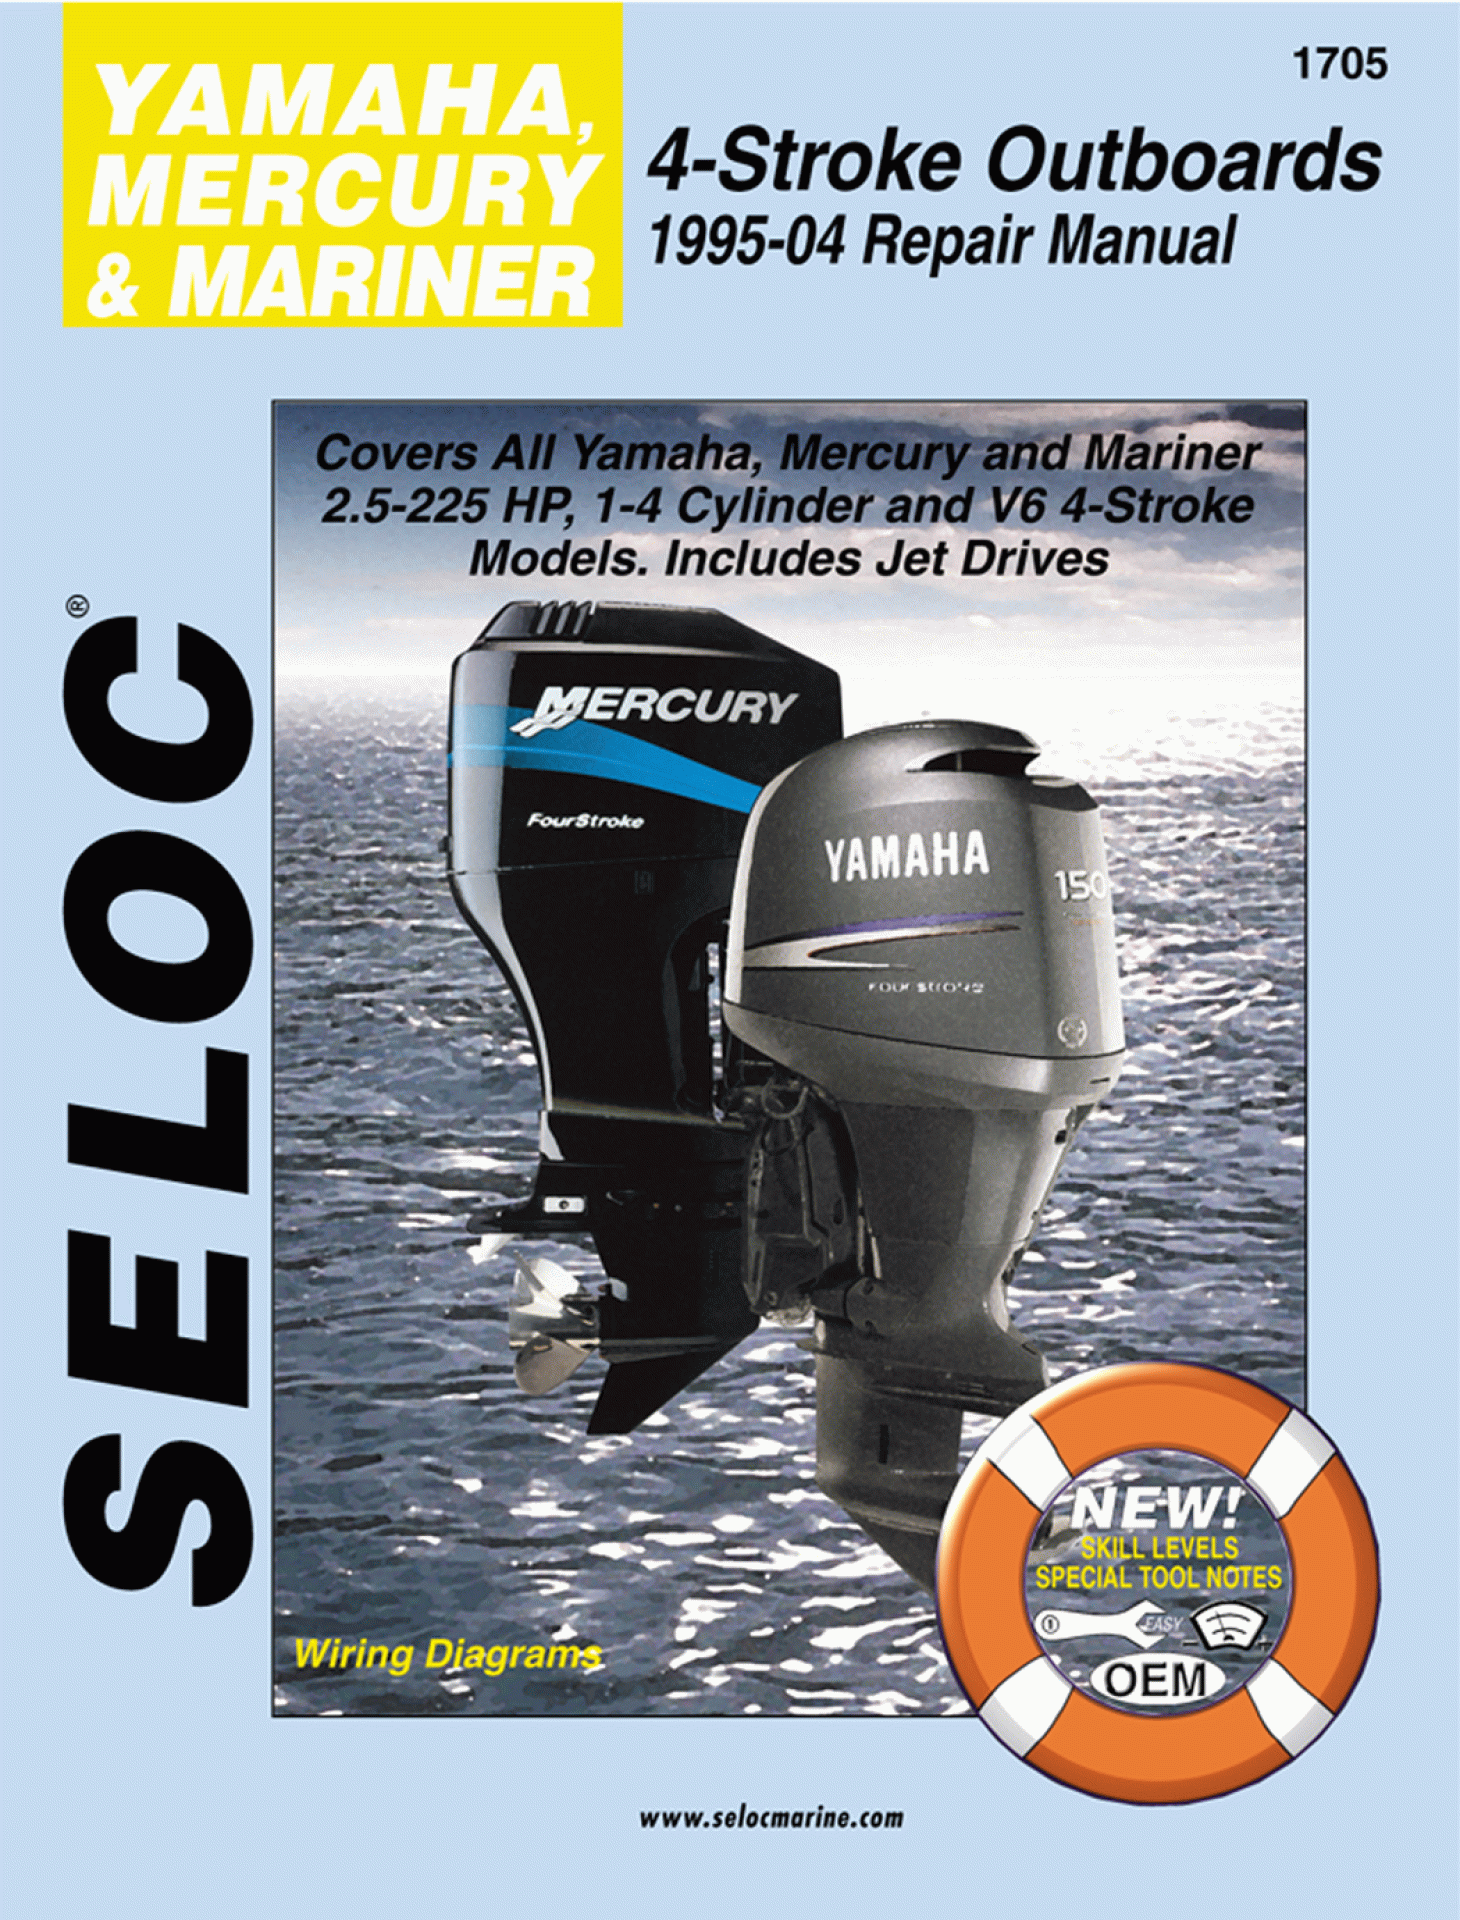 SELOC PUBLISHING | 18-01705 | REPAIR MANUAL Yamaha Outboards All Engines 1995-04